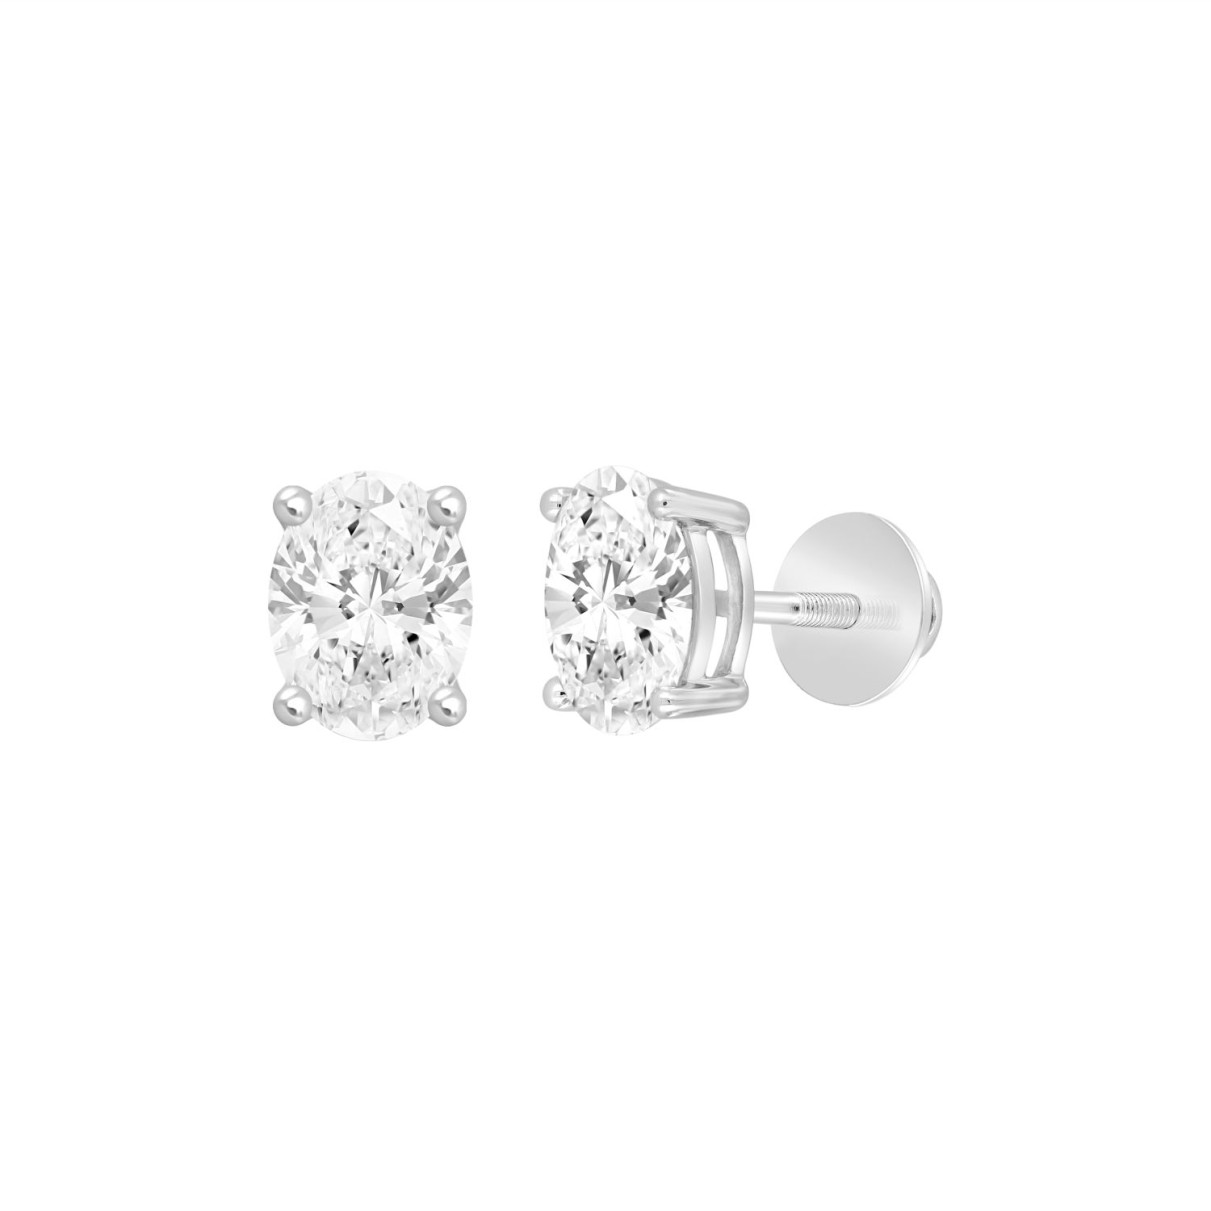 LADIES SOLITAIRE EARRINGS 1/2CT OVAL DIAMOND 14K WHITE GOLD (CENTER STONE OVAL DIAMOND 1/4CT )